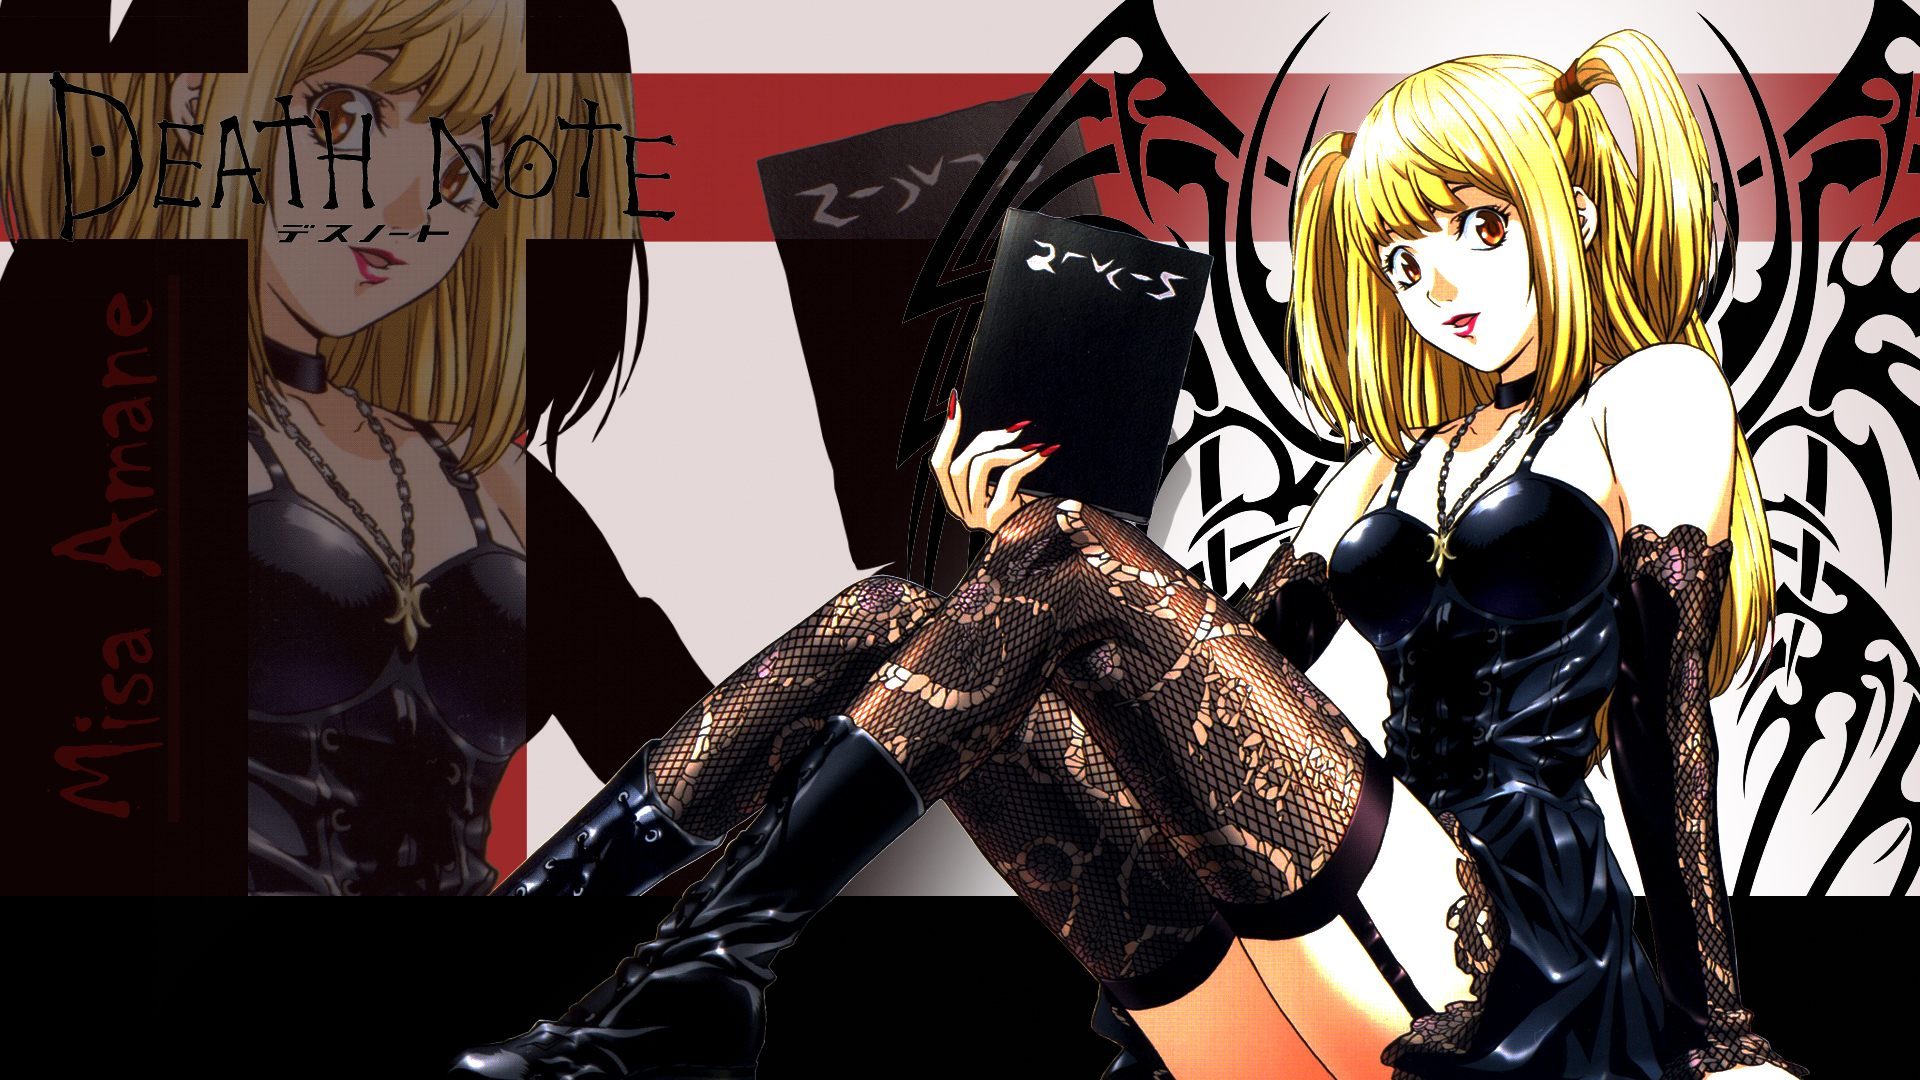 Girl From Death Note - 1920x1080 Wallpaper 